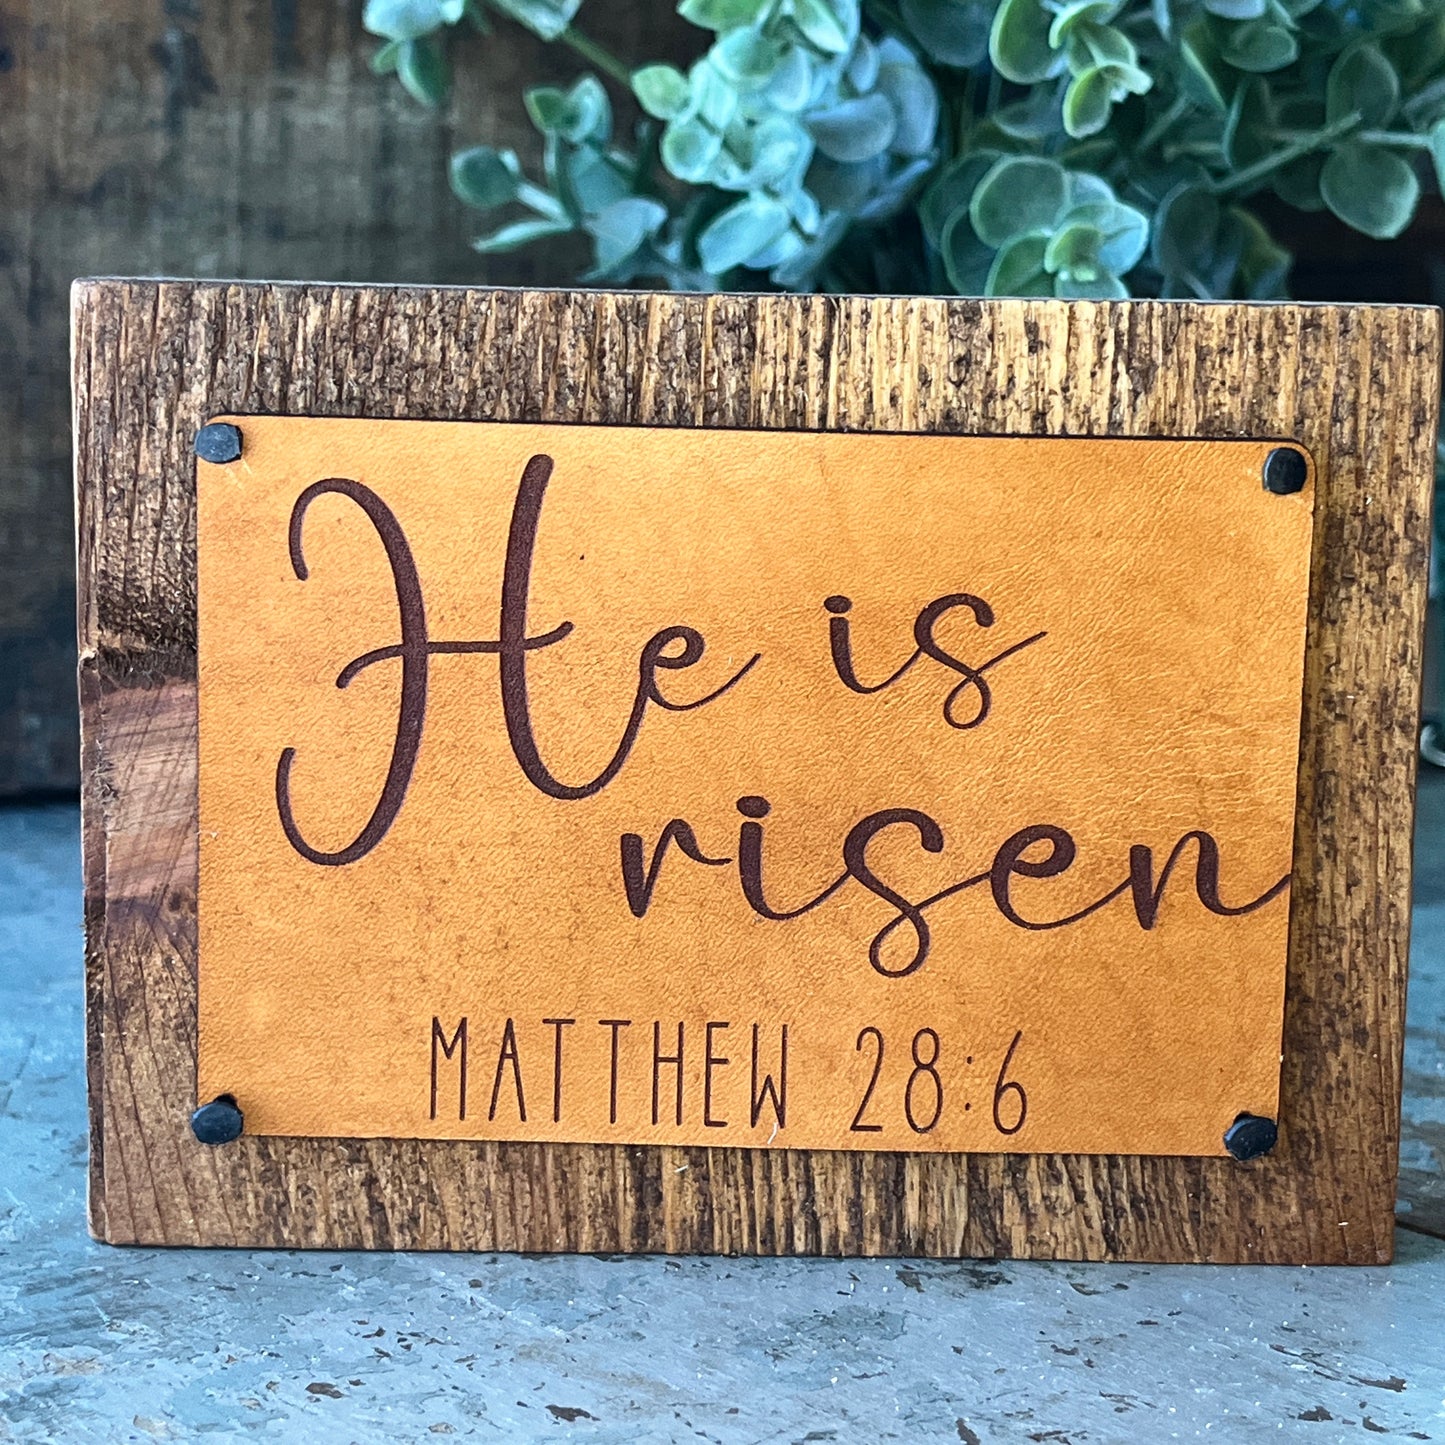 He is risen wood and leather sign, front